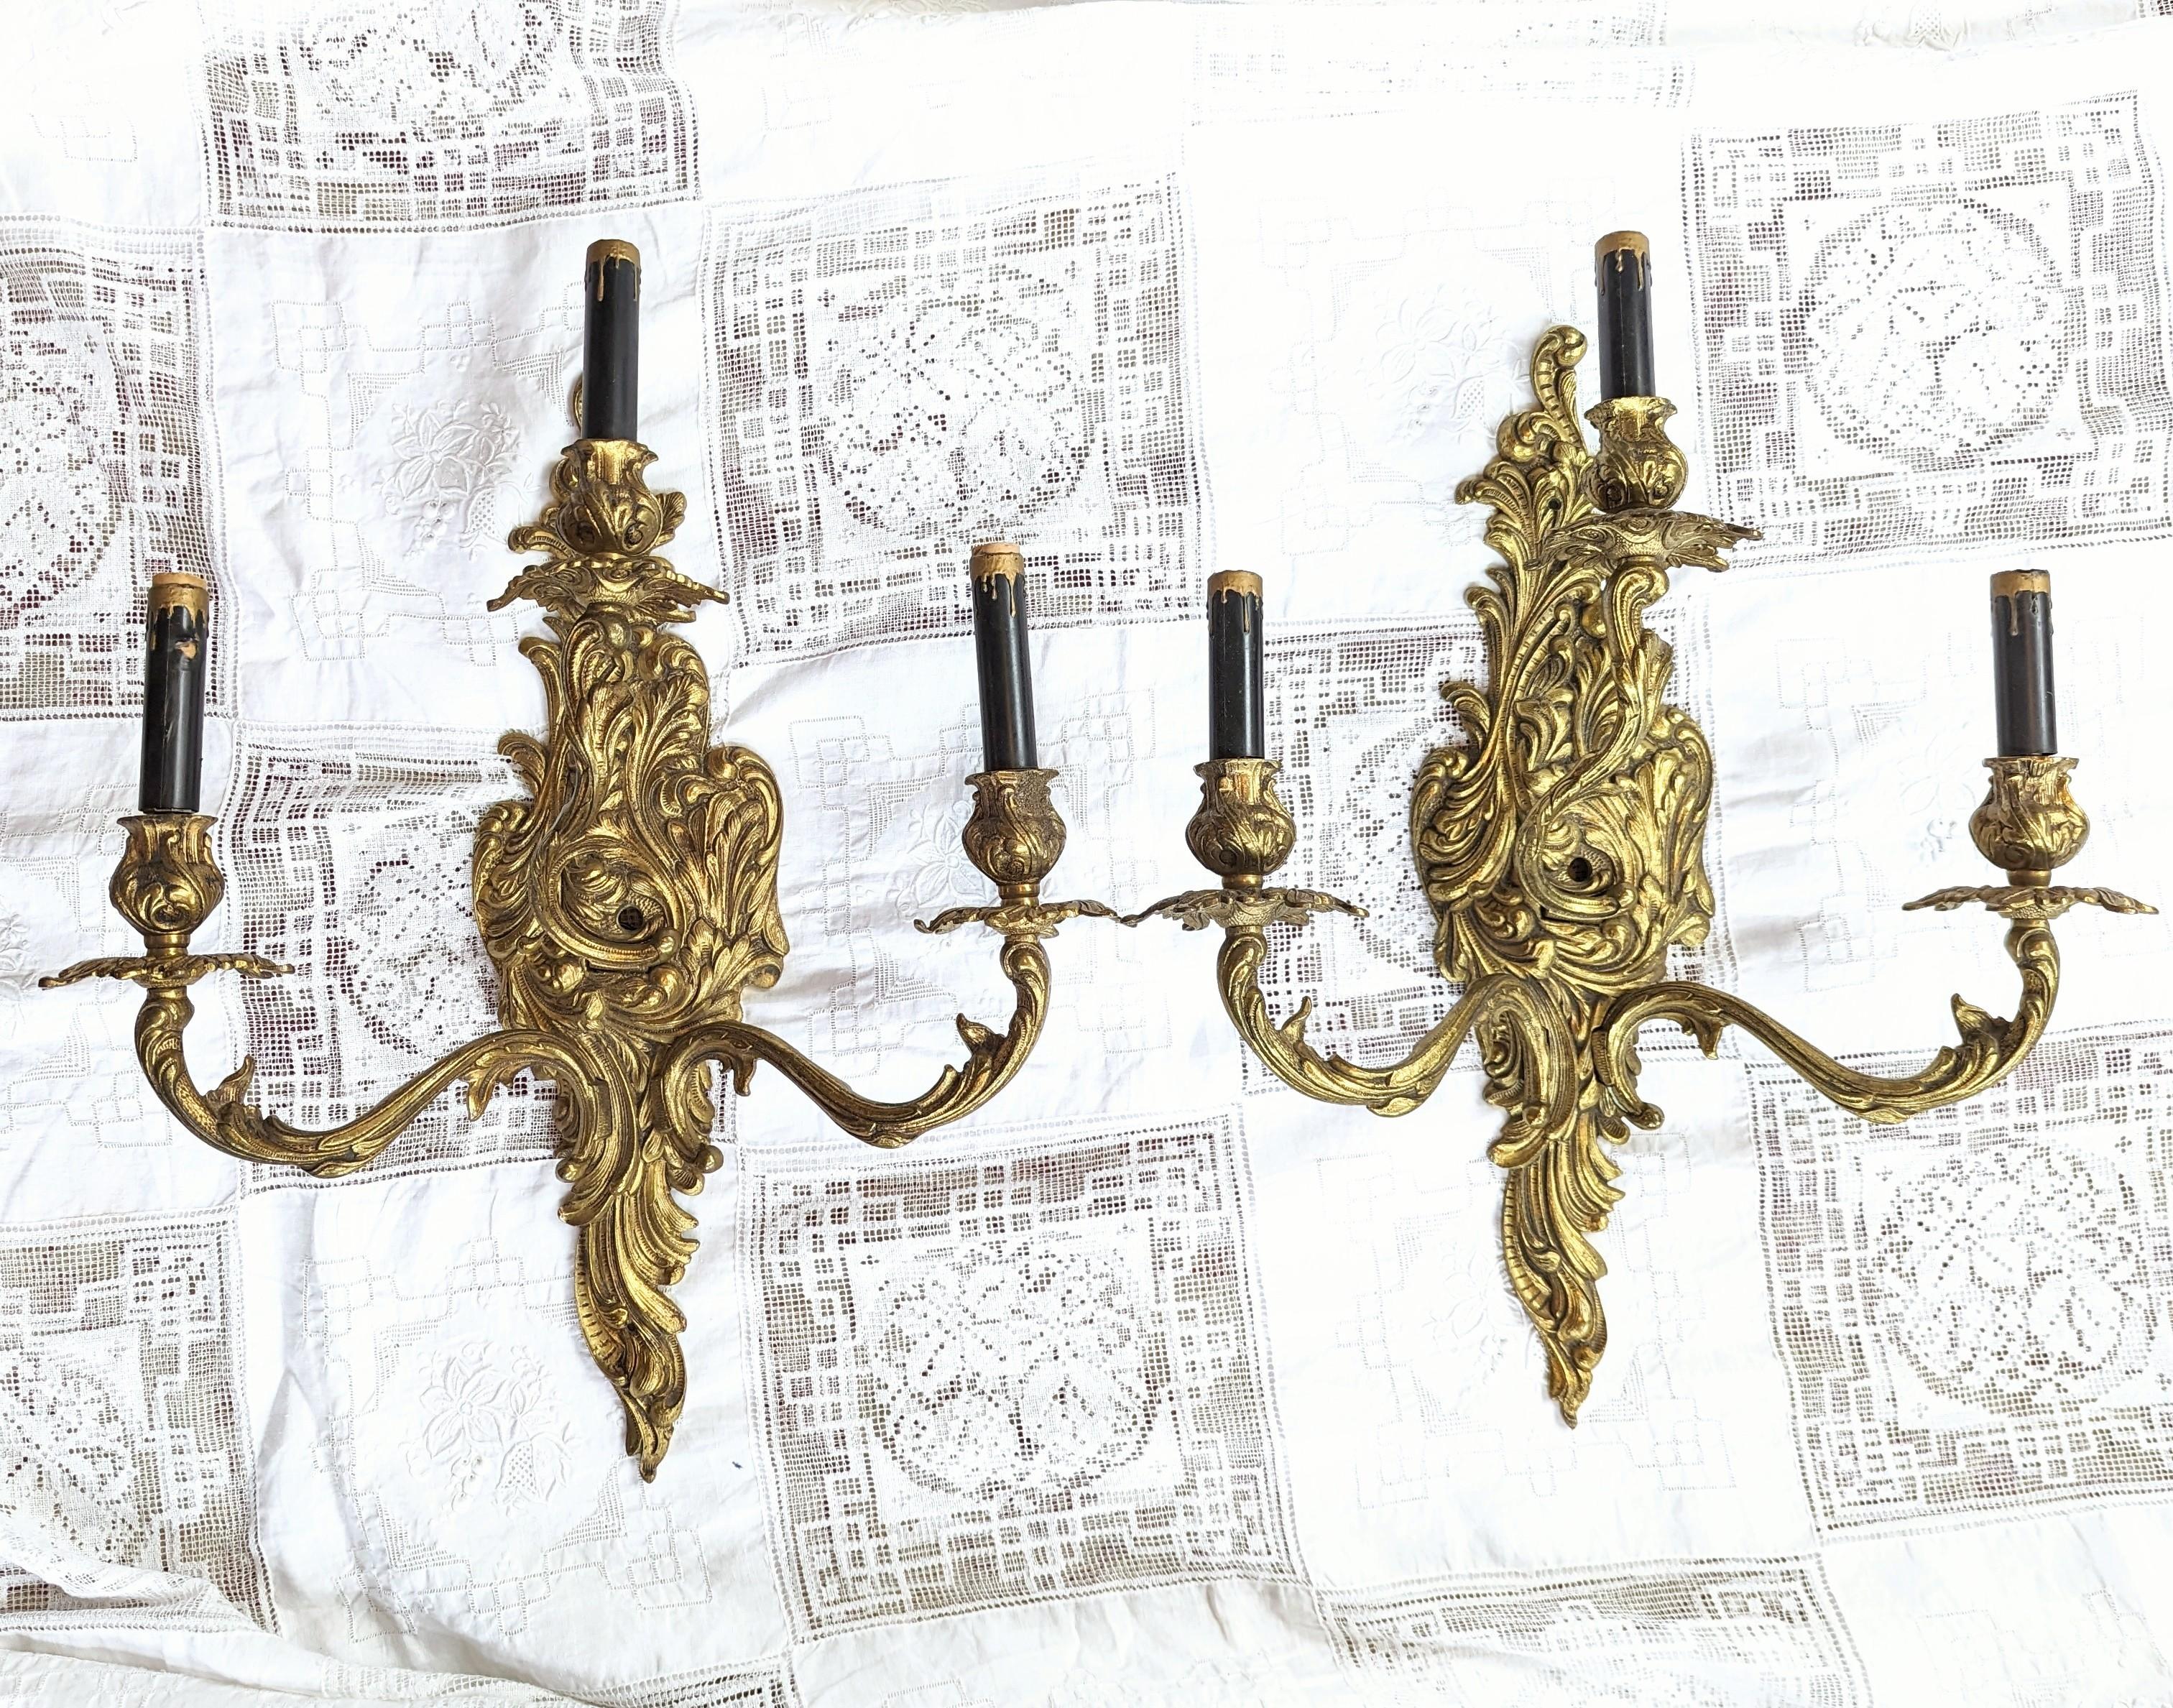 Pair of Magnificent Antique French Gilded Sconces. Measures 19 inches from top to bottom, the arms extend to approximately 16.5 inches in width, the interior portion is 5 inches in width, and they extend approximately 6.5 inches out from the wall.